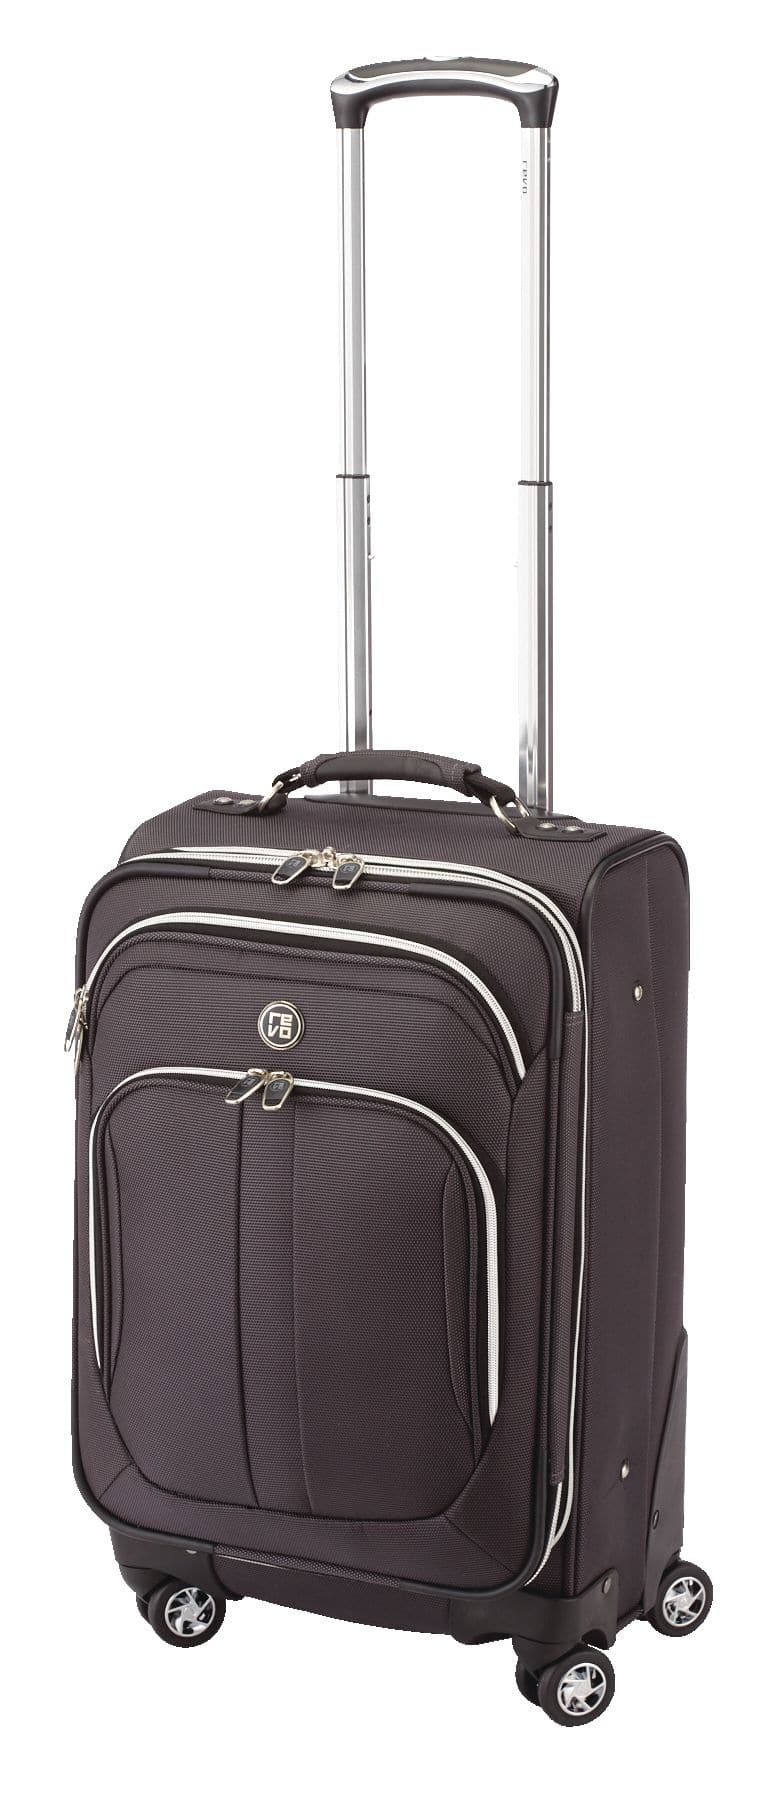 Revo Twist II Expandable Softside Spinner Wheel Carry-On Travel Luggage  Suitcase, 21-in